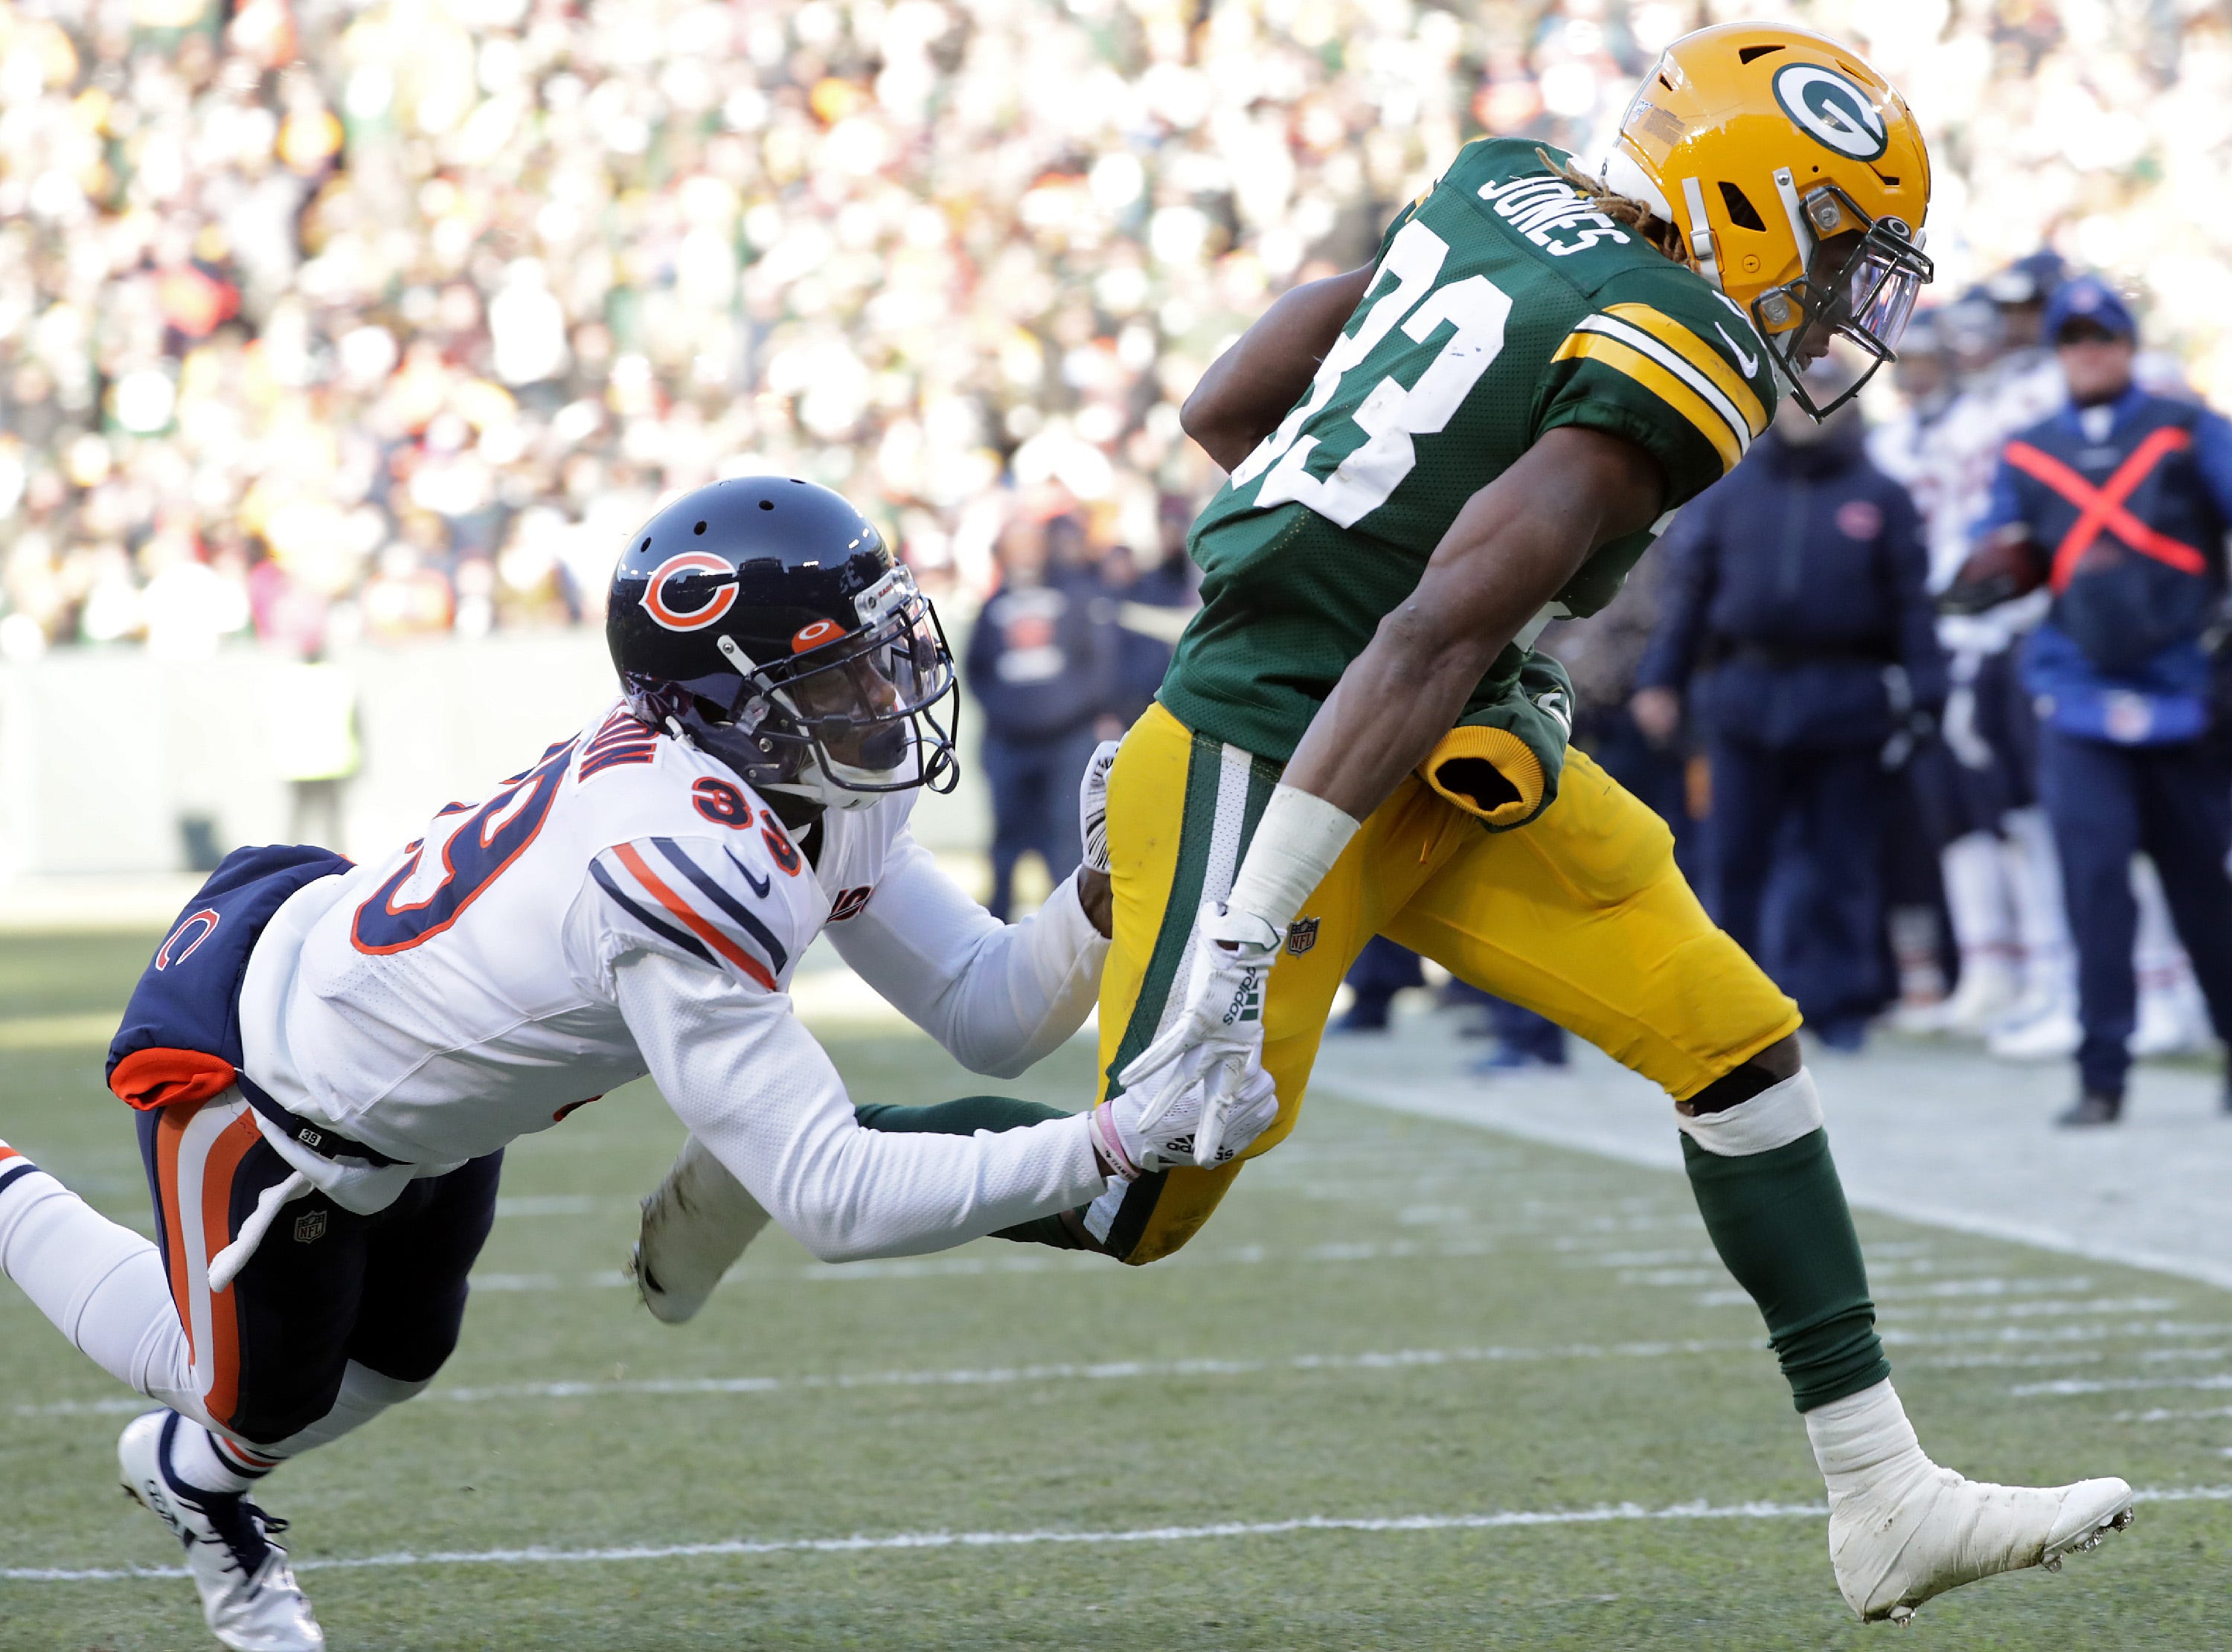 Green Bay Packers running back Aaron Jones (33) rushes for a third quarter touchdown against the defense of the Chicago Bears free safety Eddie Jackson (39) during their football game on Sunday, December 15, 2019, at Lambeau Field in Green Bay, Wis.